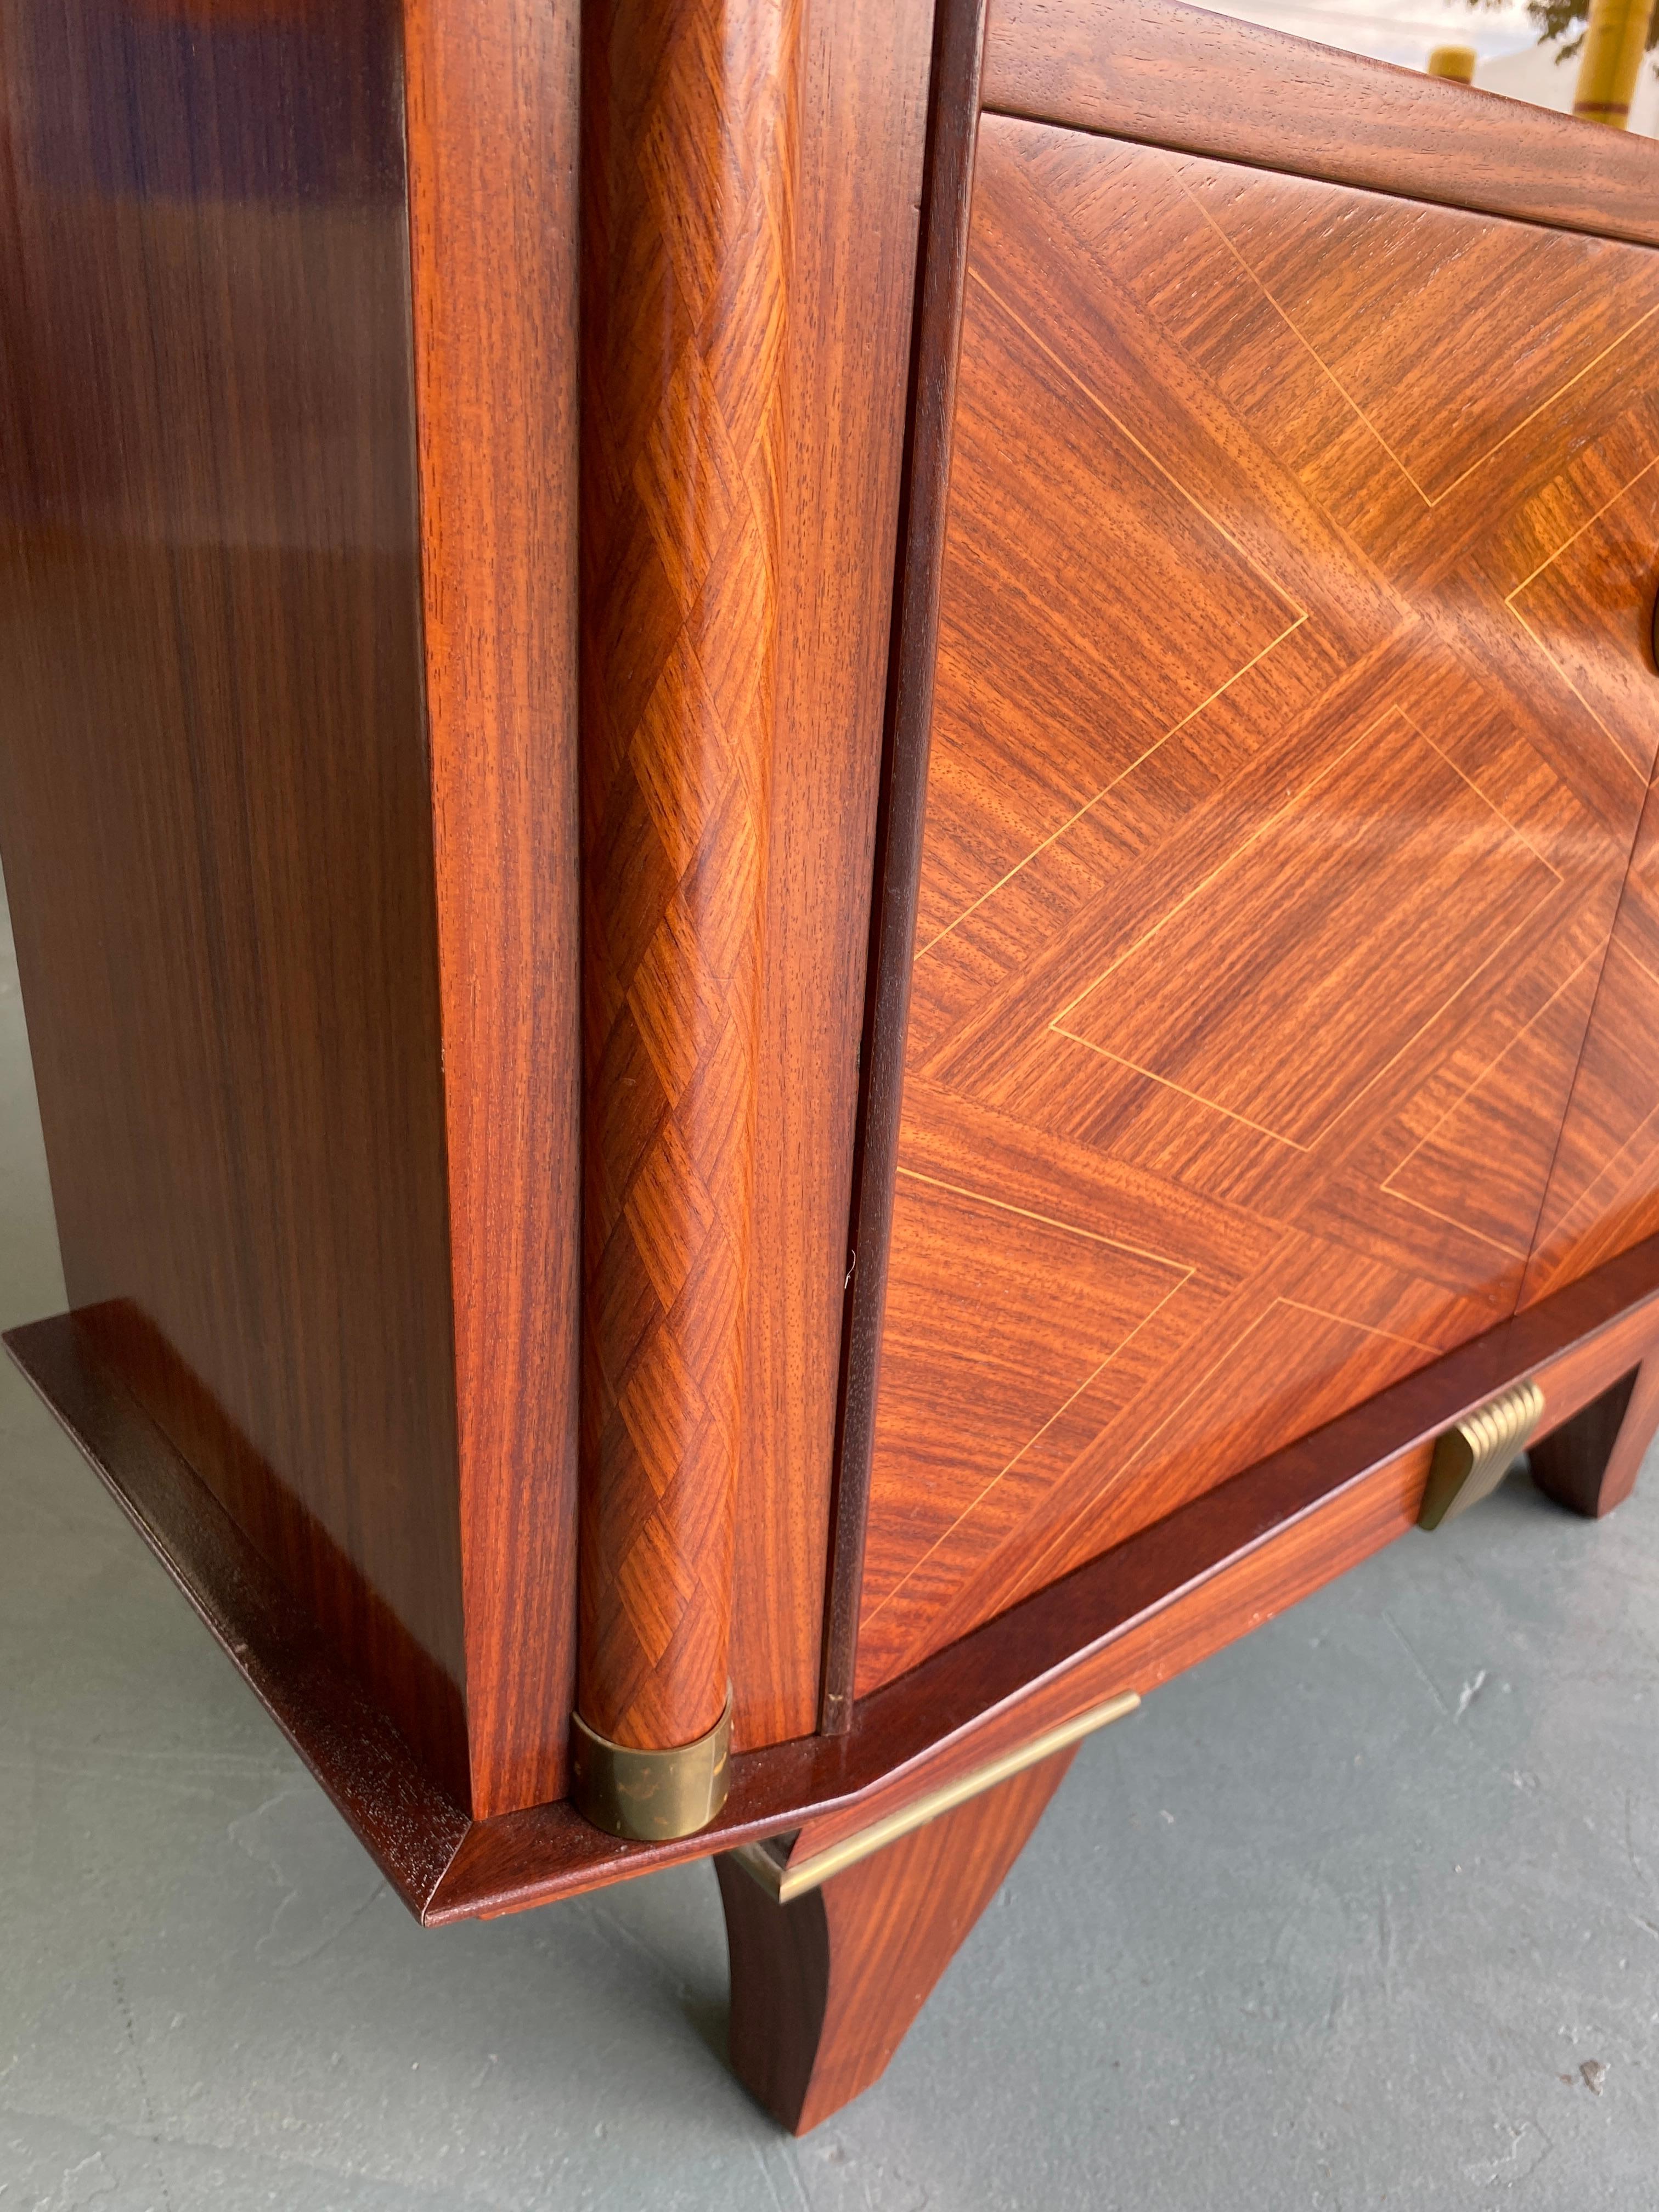 French Art Deco Dry Bar Cabinet, 
Elegance Attributed to Jules Leleu

This captivating French Art Deco display cabinet, attributed to the renowned designer Jules Leleu, embodies the era's elegance and functionality. Crafted from luxurious mahogany